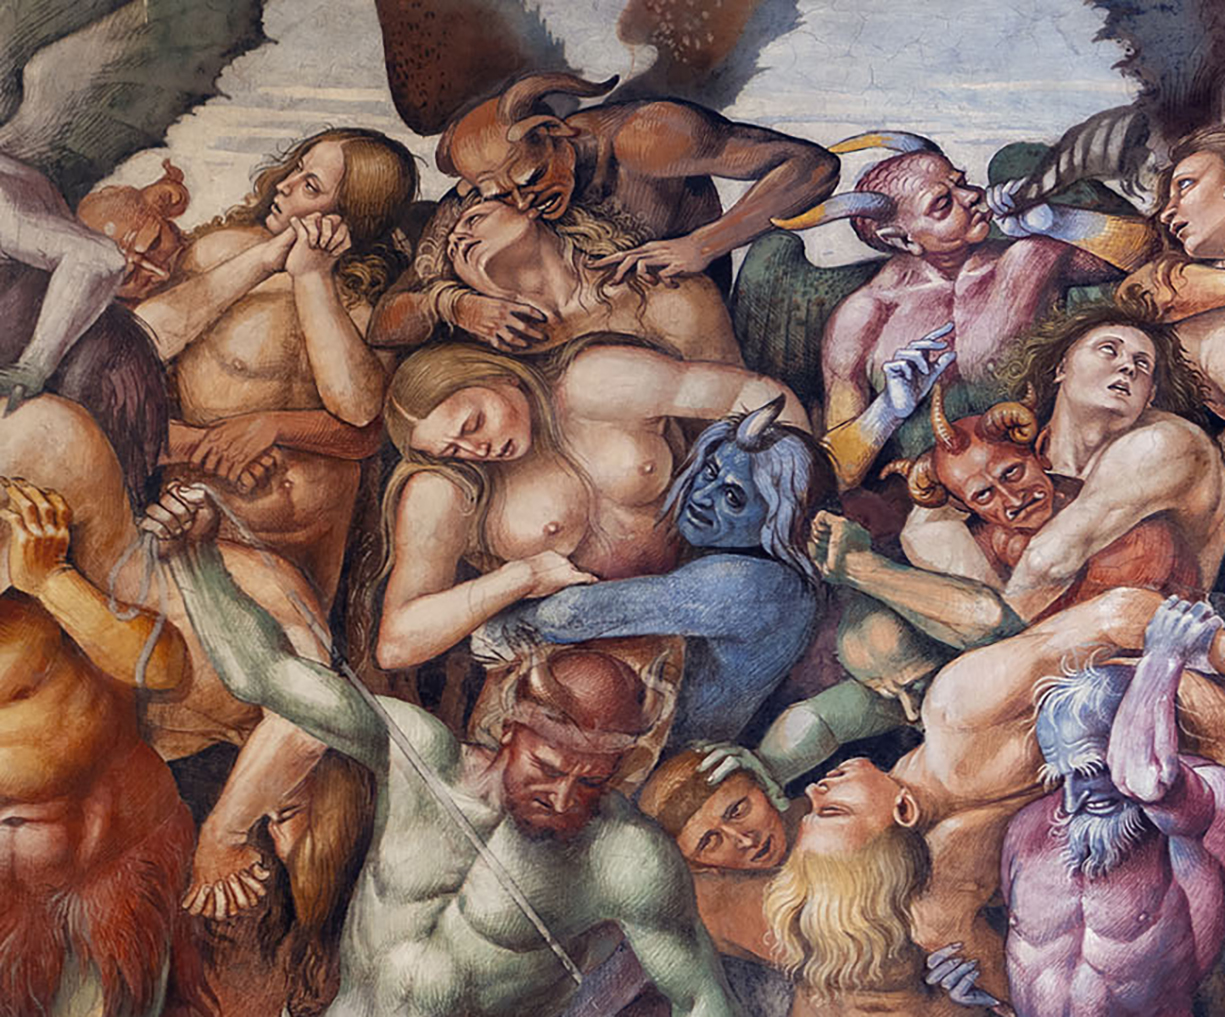 Naked Demon Girl Sex - Luca Signorelli, The Damned Cast into Hell â€“ Smarthistory